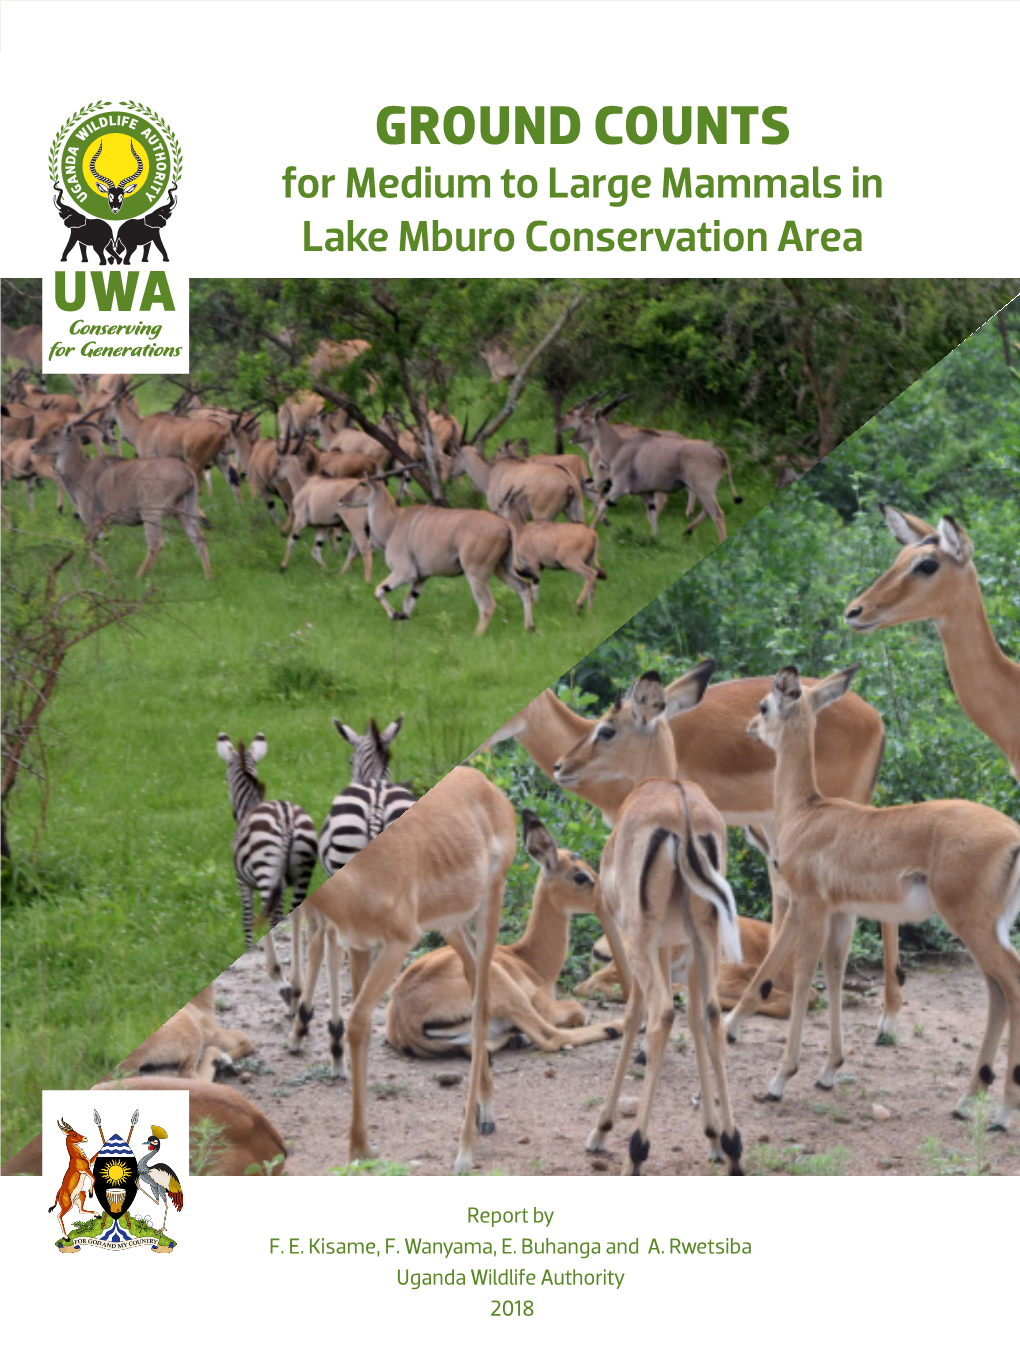 Ground Counts for Medium to Large Mammals in Lake Mburo National Park